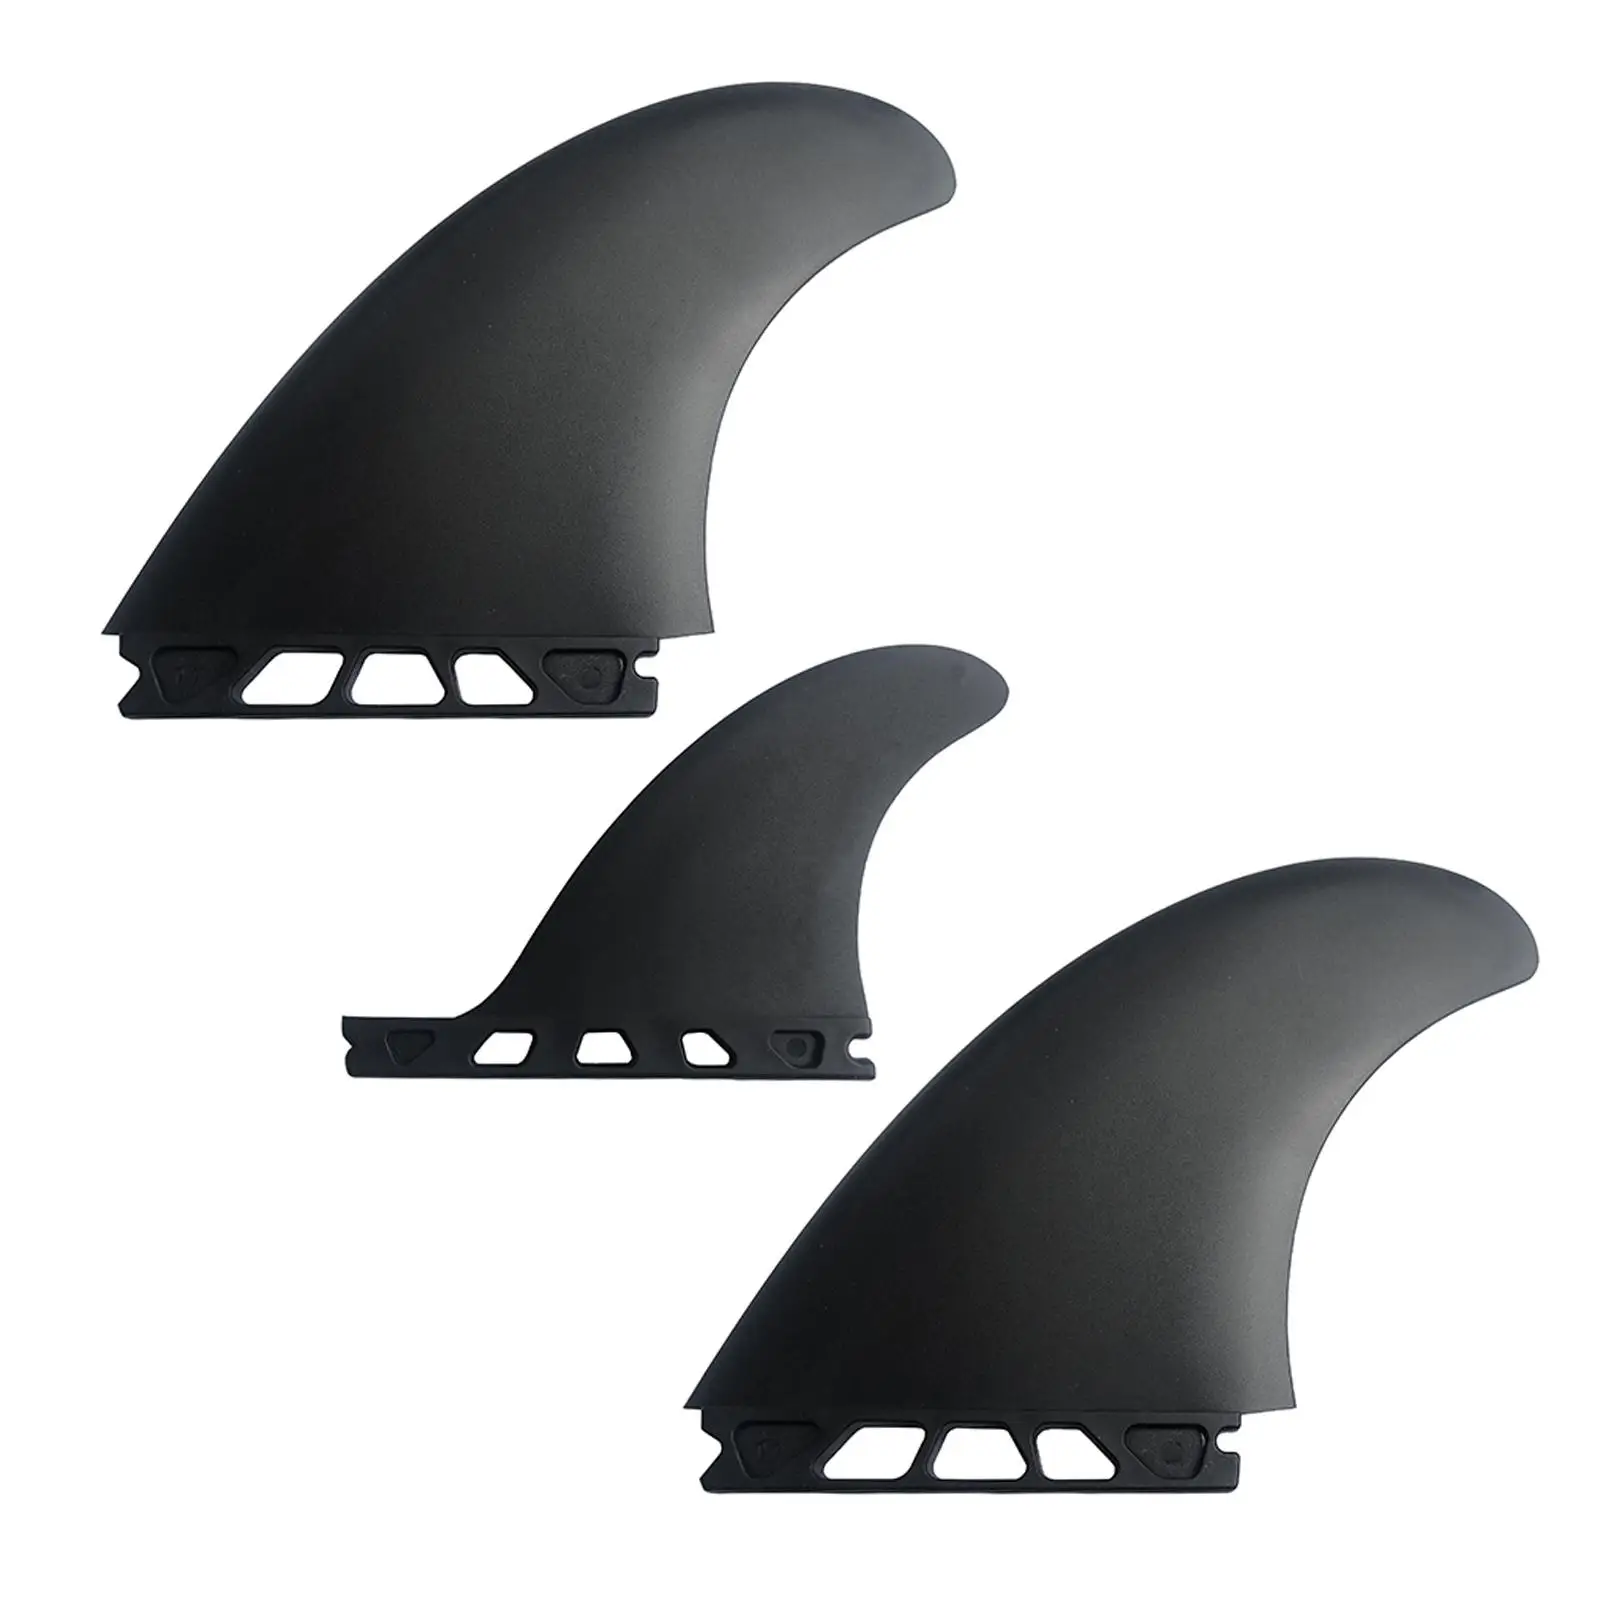 3x Universal Surfboard Fins Replacement Surfing Fin for Canoe Stand up Paddleboard Longboard